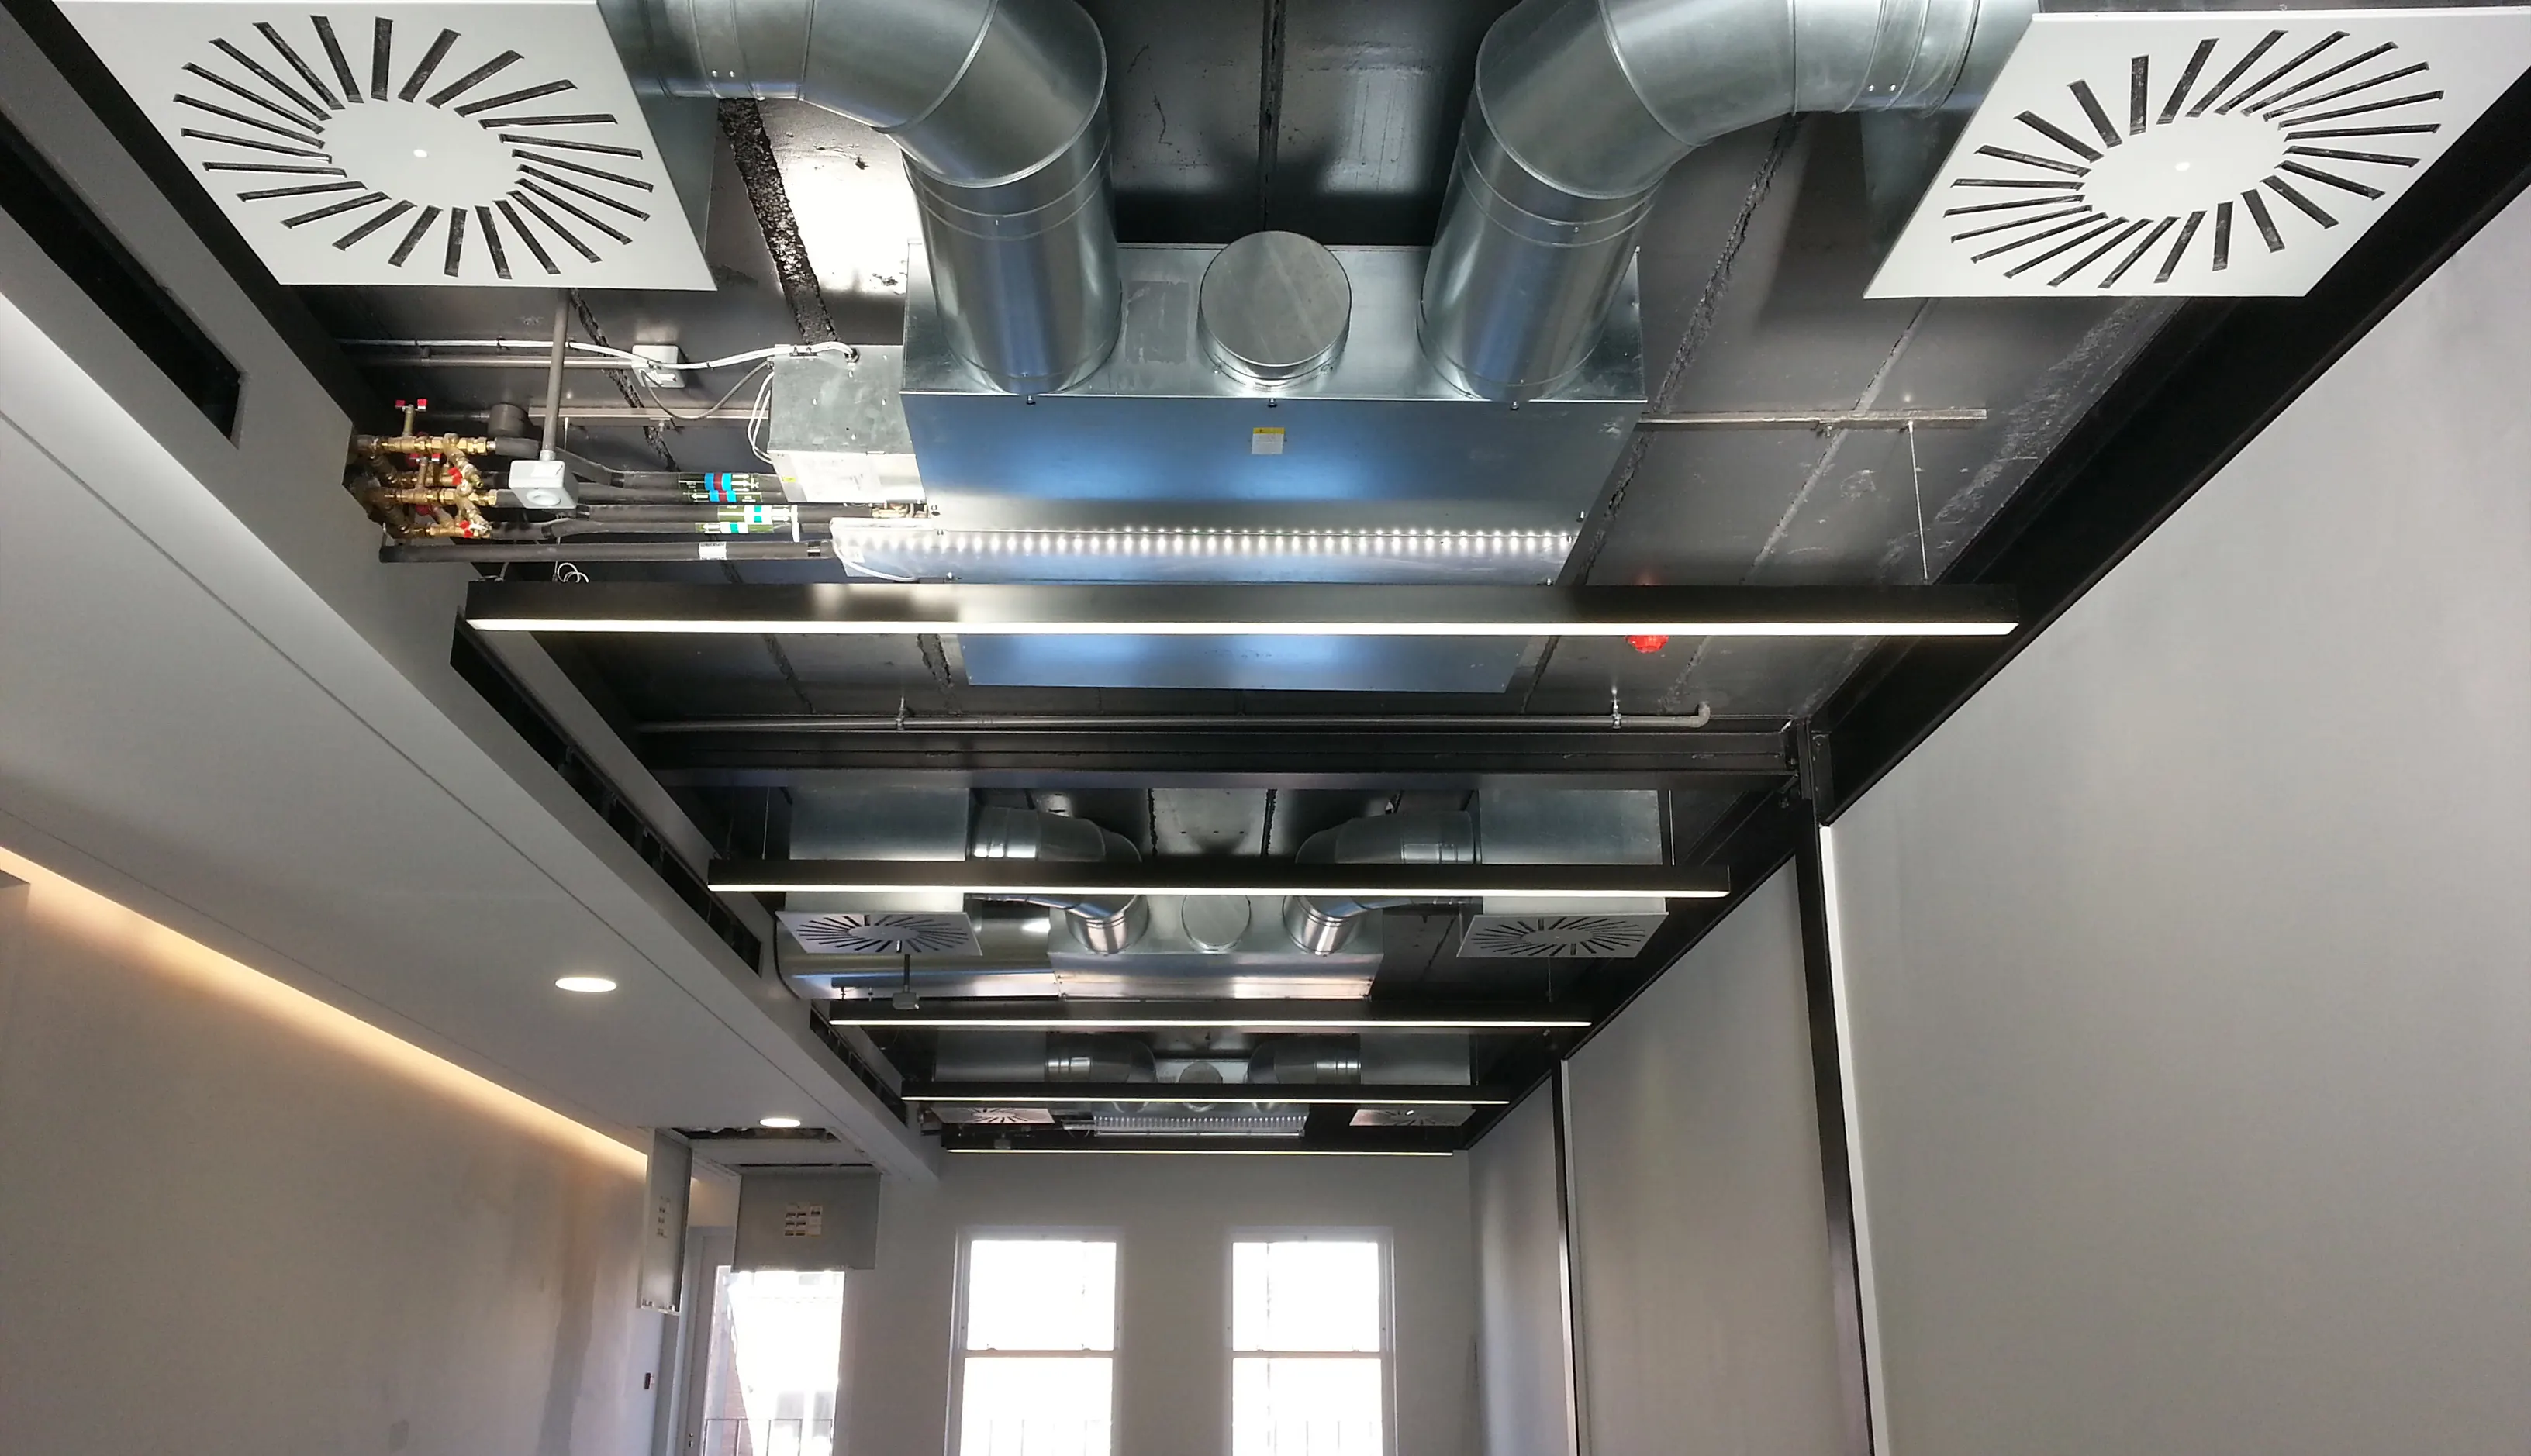 Ducted Air Conditioning With Ventilation and Heat Recovery installed for office units by Masper HVAC Engineers